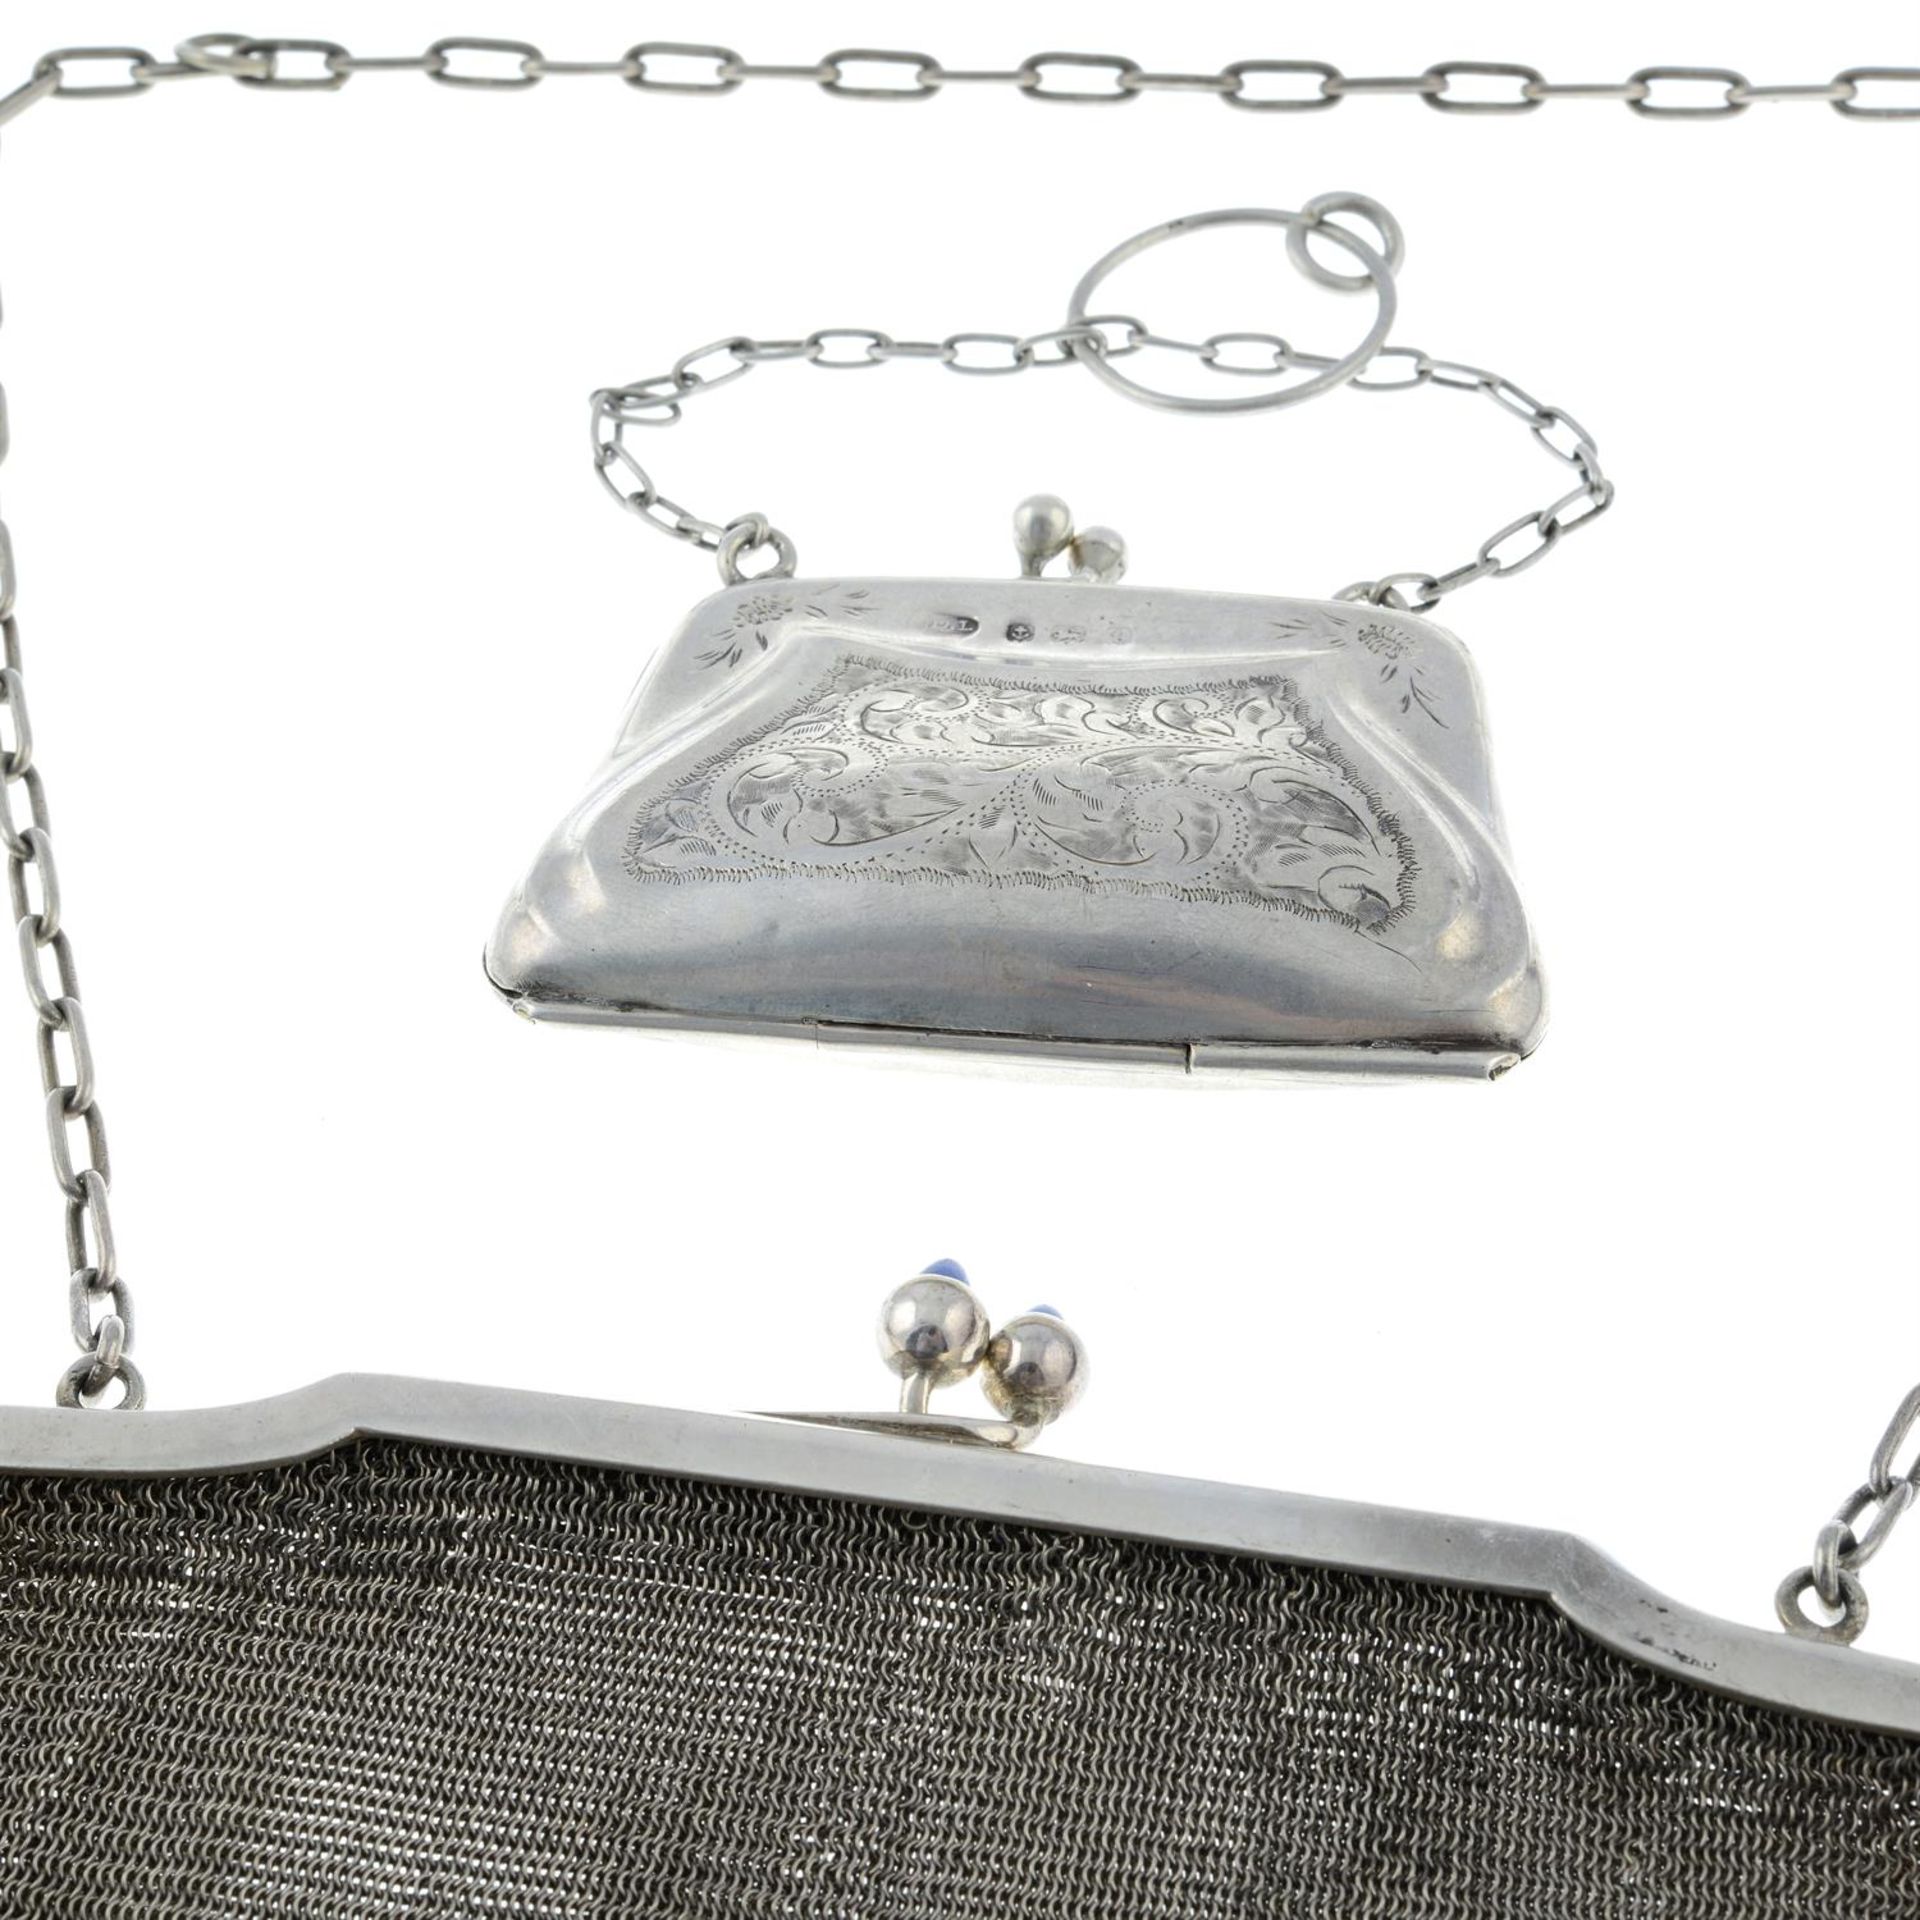 A selection of early 20th century and later jewellery and accessories, to include three coin purses. - Image 3 of 3